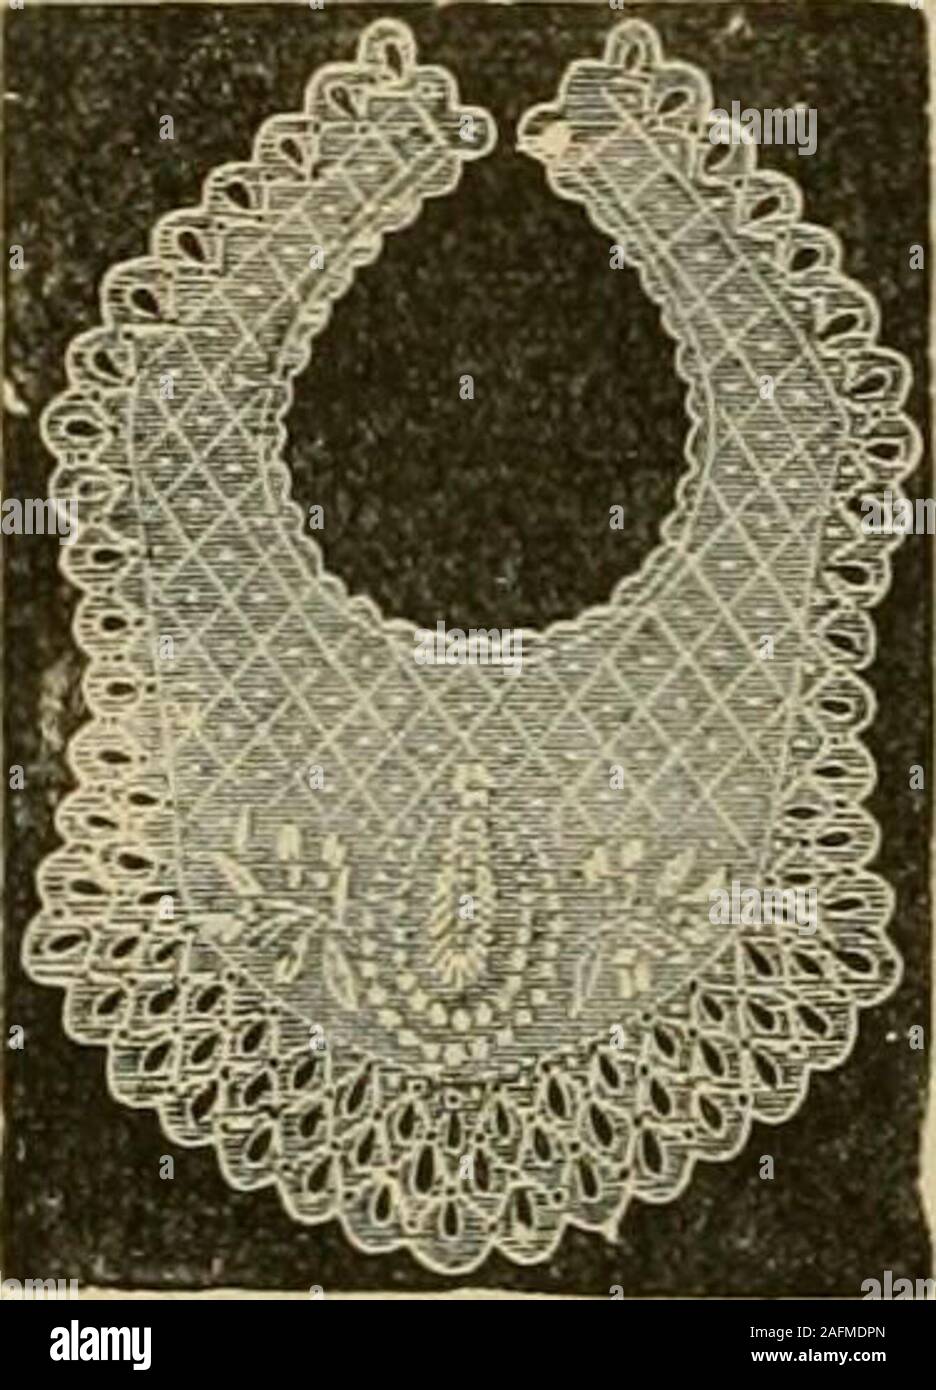 . Fall and Winter, 1890-91 Fashion Catalogue / H. O'Neill and Co.. No, 595. Hand Knit CarriageRohe. tiimnied with Rilib n fiuislied witli full friuffe ;in cream,bliio or pink. *2 T-v Similar styleswithout rlMini! Jl JIM and 2.2,). No. G03. Hand Embroid-ered bibs. Ho. 18c. 20c, S5c,29c. 3.)C, 45c, G5o, b6c, $1.10.Cotton bibs. Bo. No Gil. Hand Knit Dr-aweiLoffiniiirs, with or without feet,iizisti»3cas;in navy, blown,iJTTnet or wliie, 85o: finer, inTihitc 61 20. 1 39. l..&gt;9, 1.09. Stock Photo